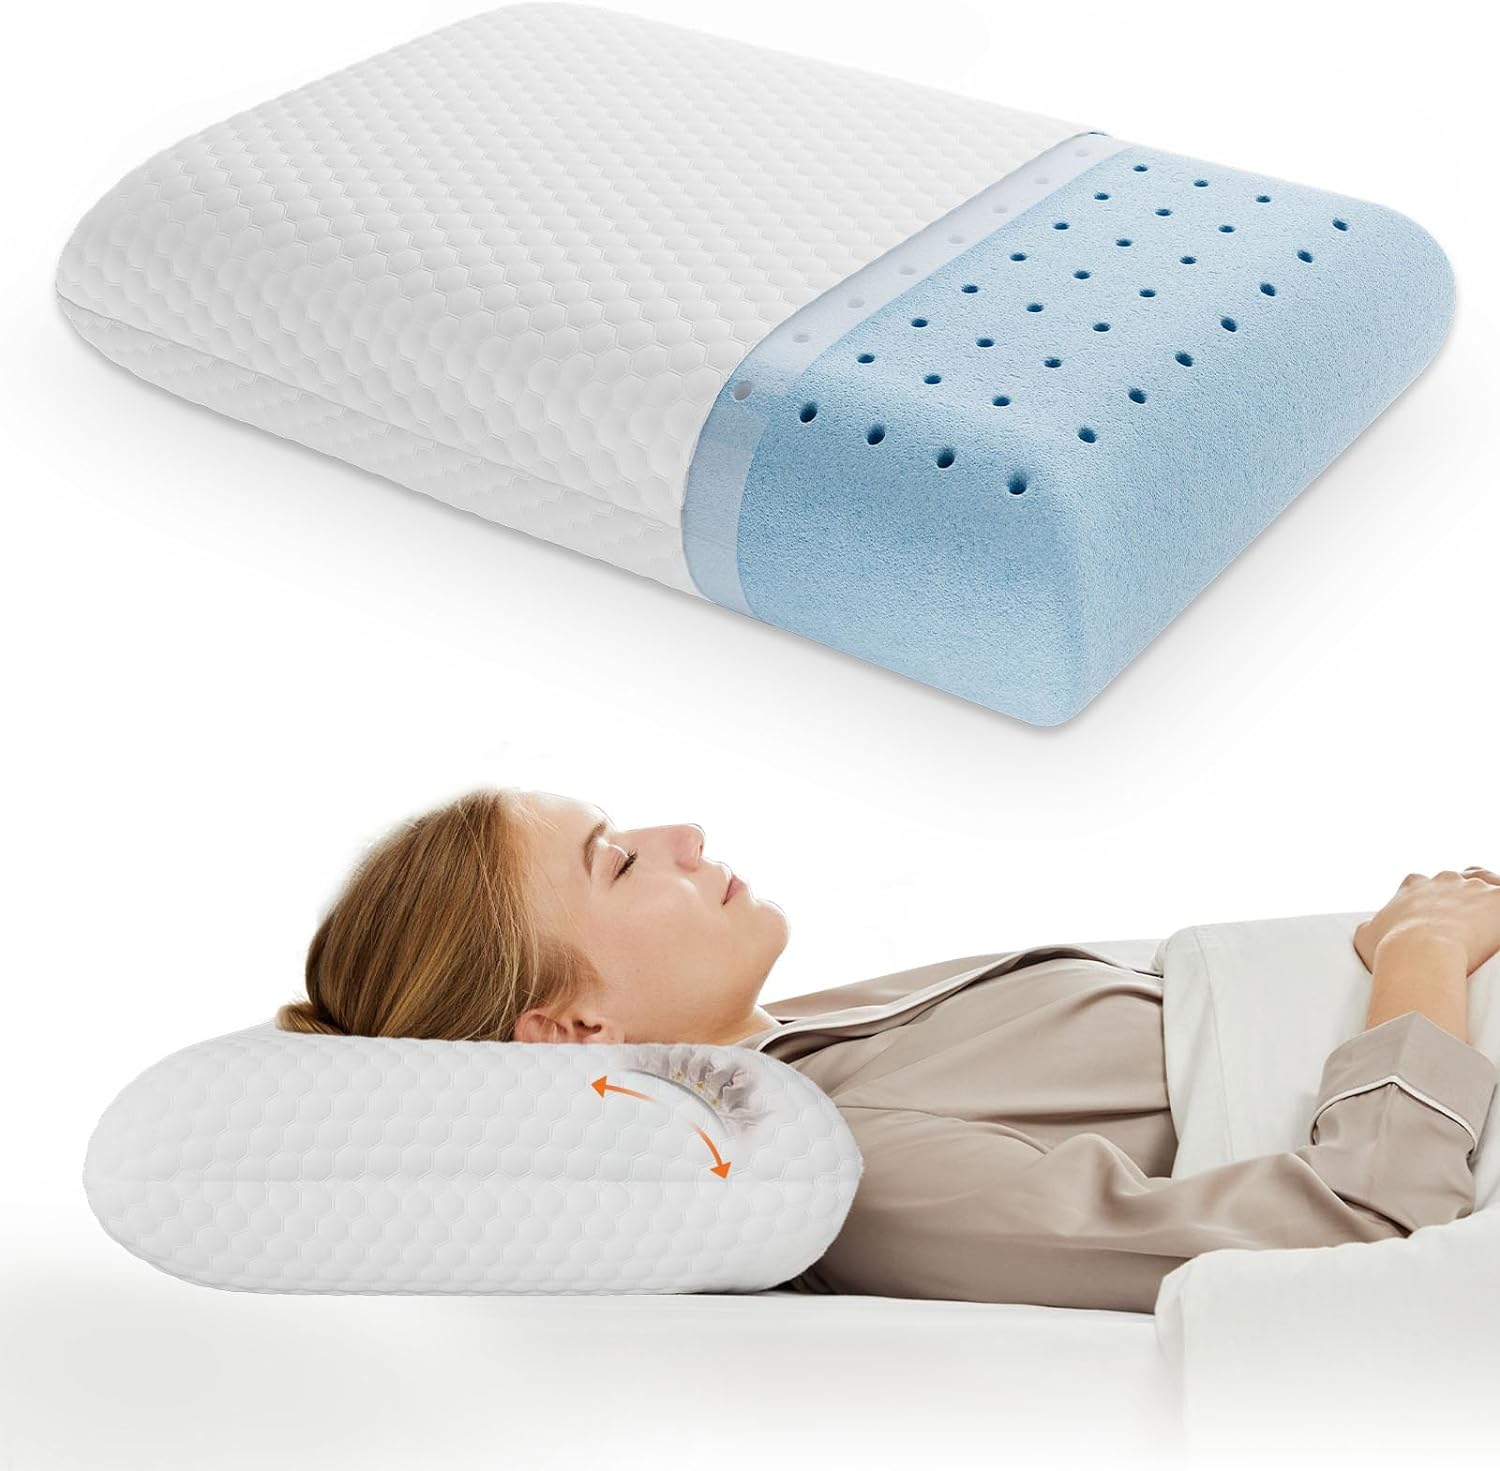 I like a firm, supportive pillow. I was worried at first because this pillow does not look thick or dense like most firm pillows I've used in the past. However, after using this pillow for several weeks I am SO happy with it. I am a back and side sleeper, and this pillow is wonderful for both. My head and neck feel supported, and the pillow maintains its form perfectly. When I bought it it cost $20, which is an amazing deal for such a high quality pillow.